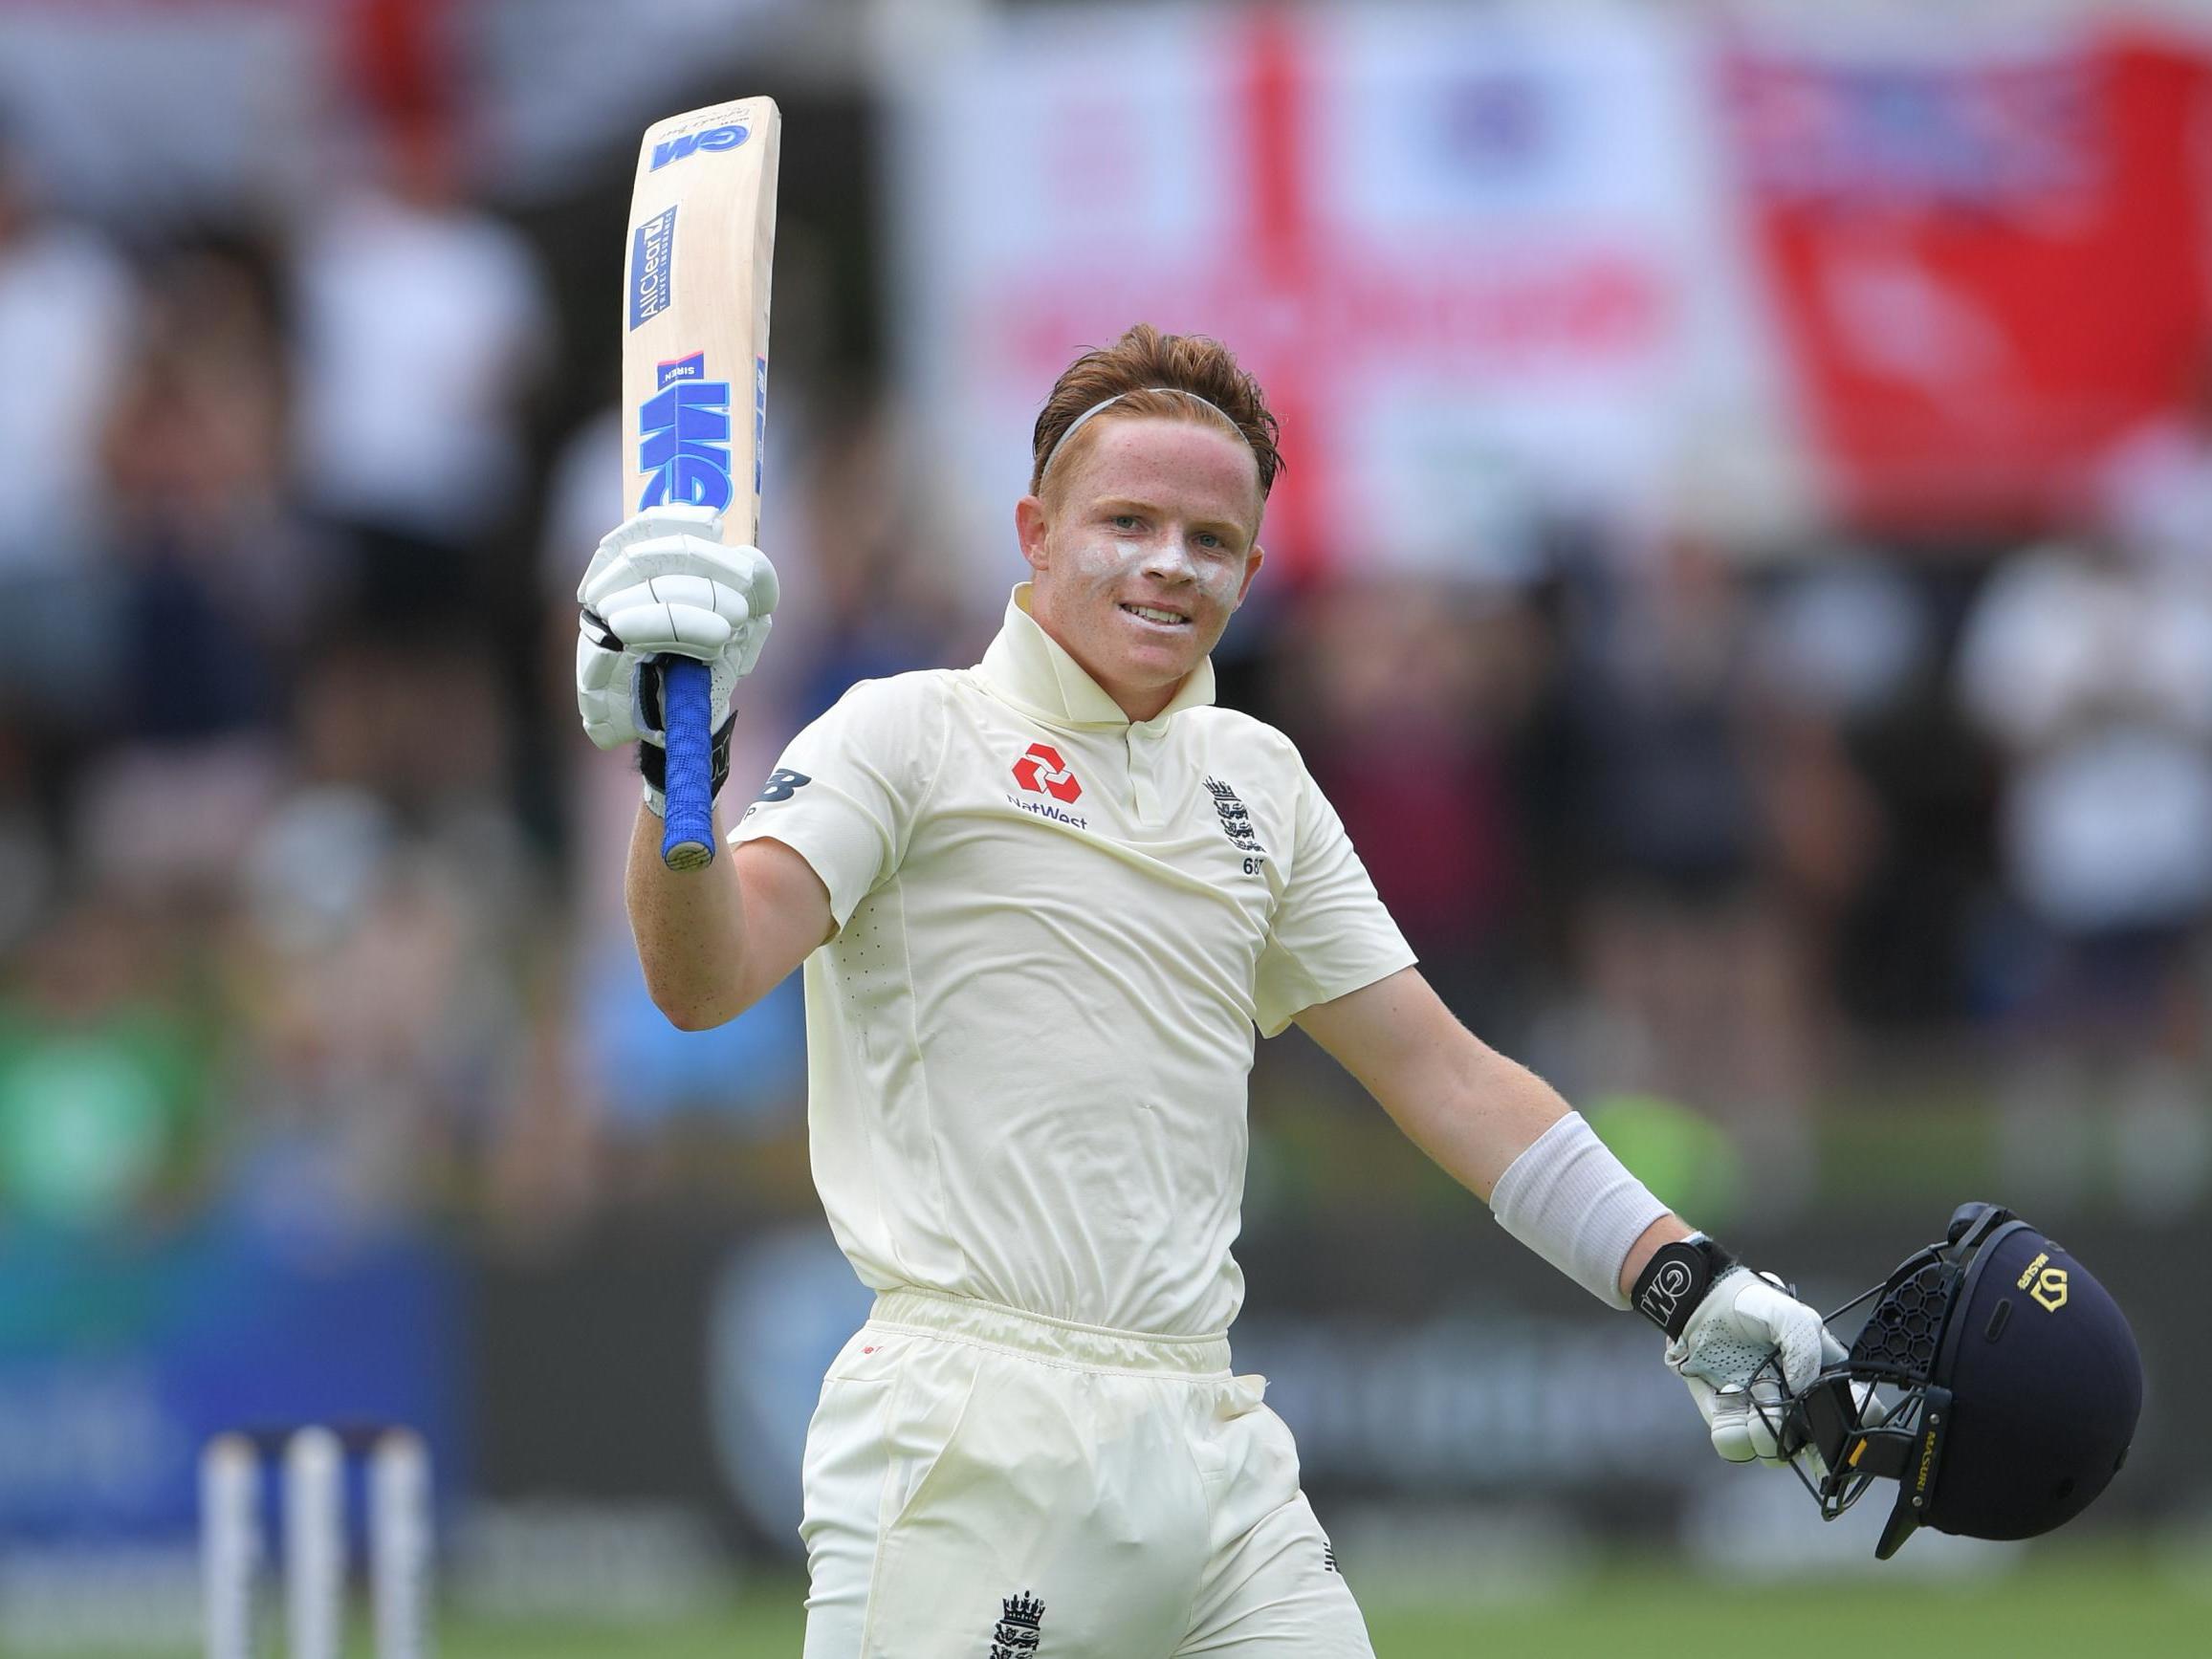 The England youngster celebrates hitting his hundred